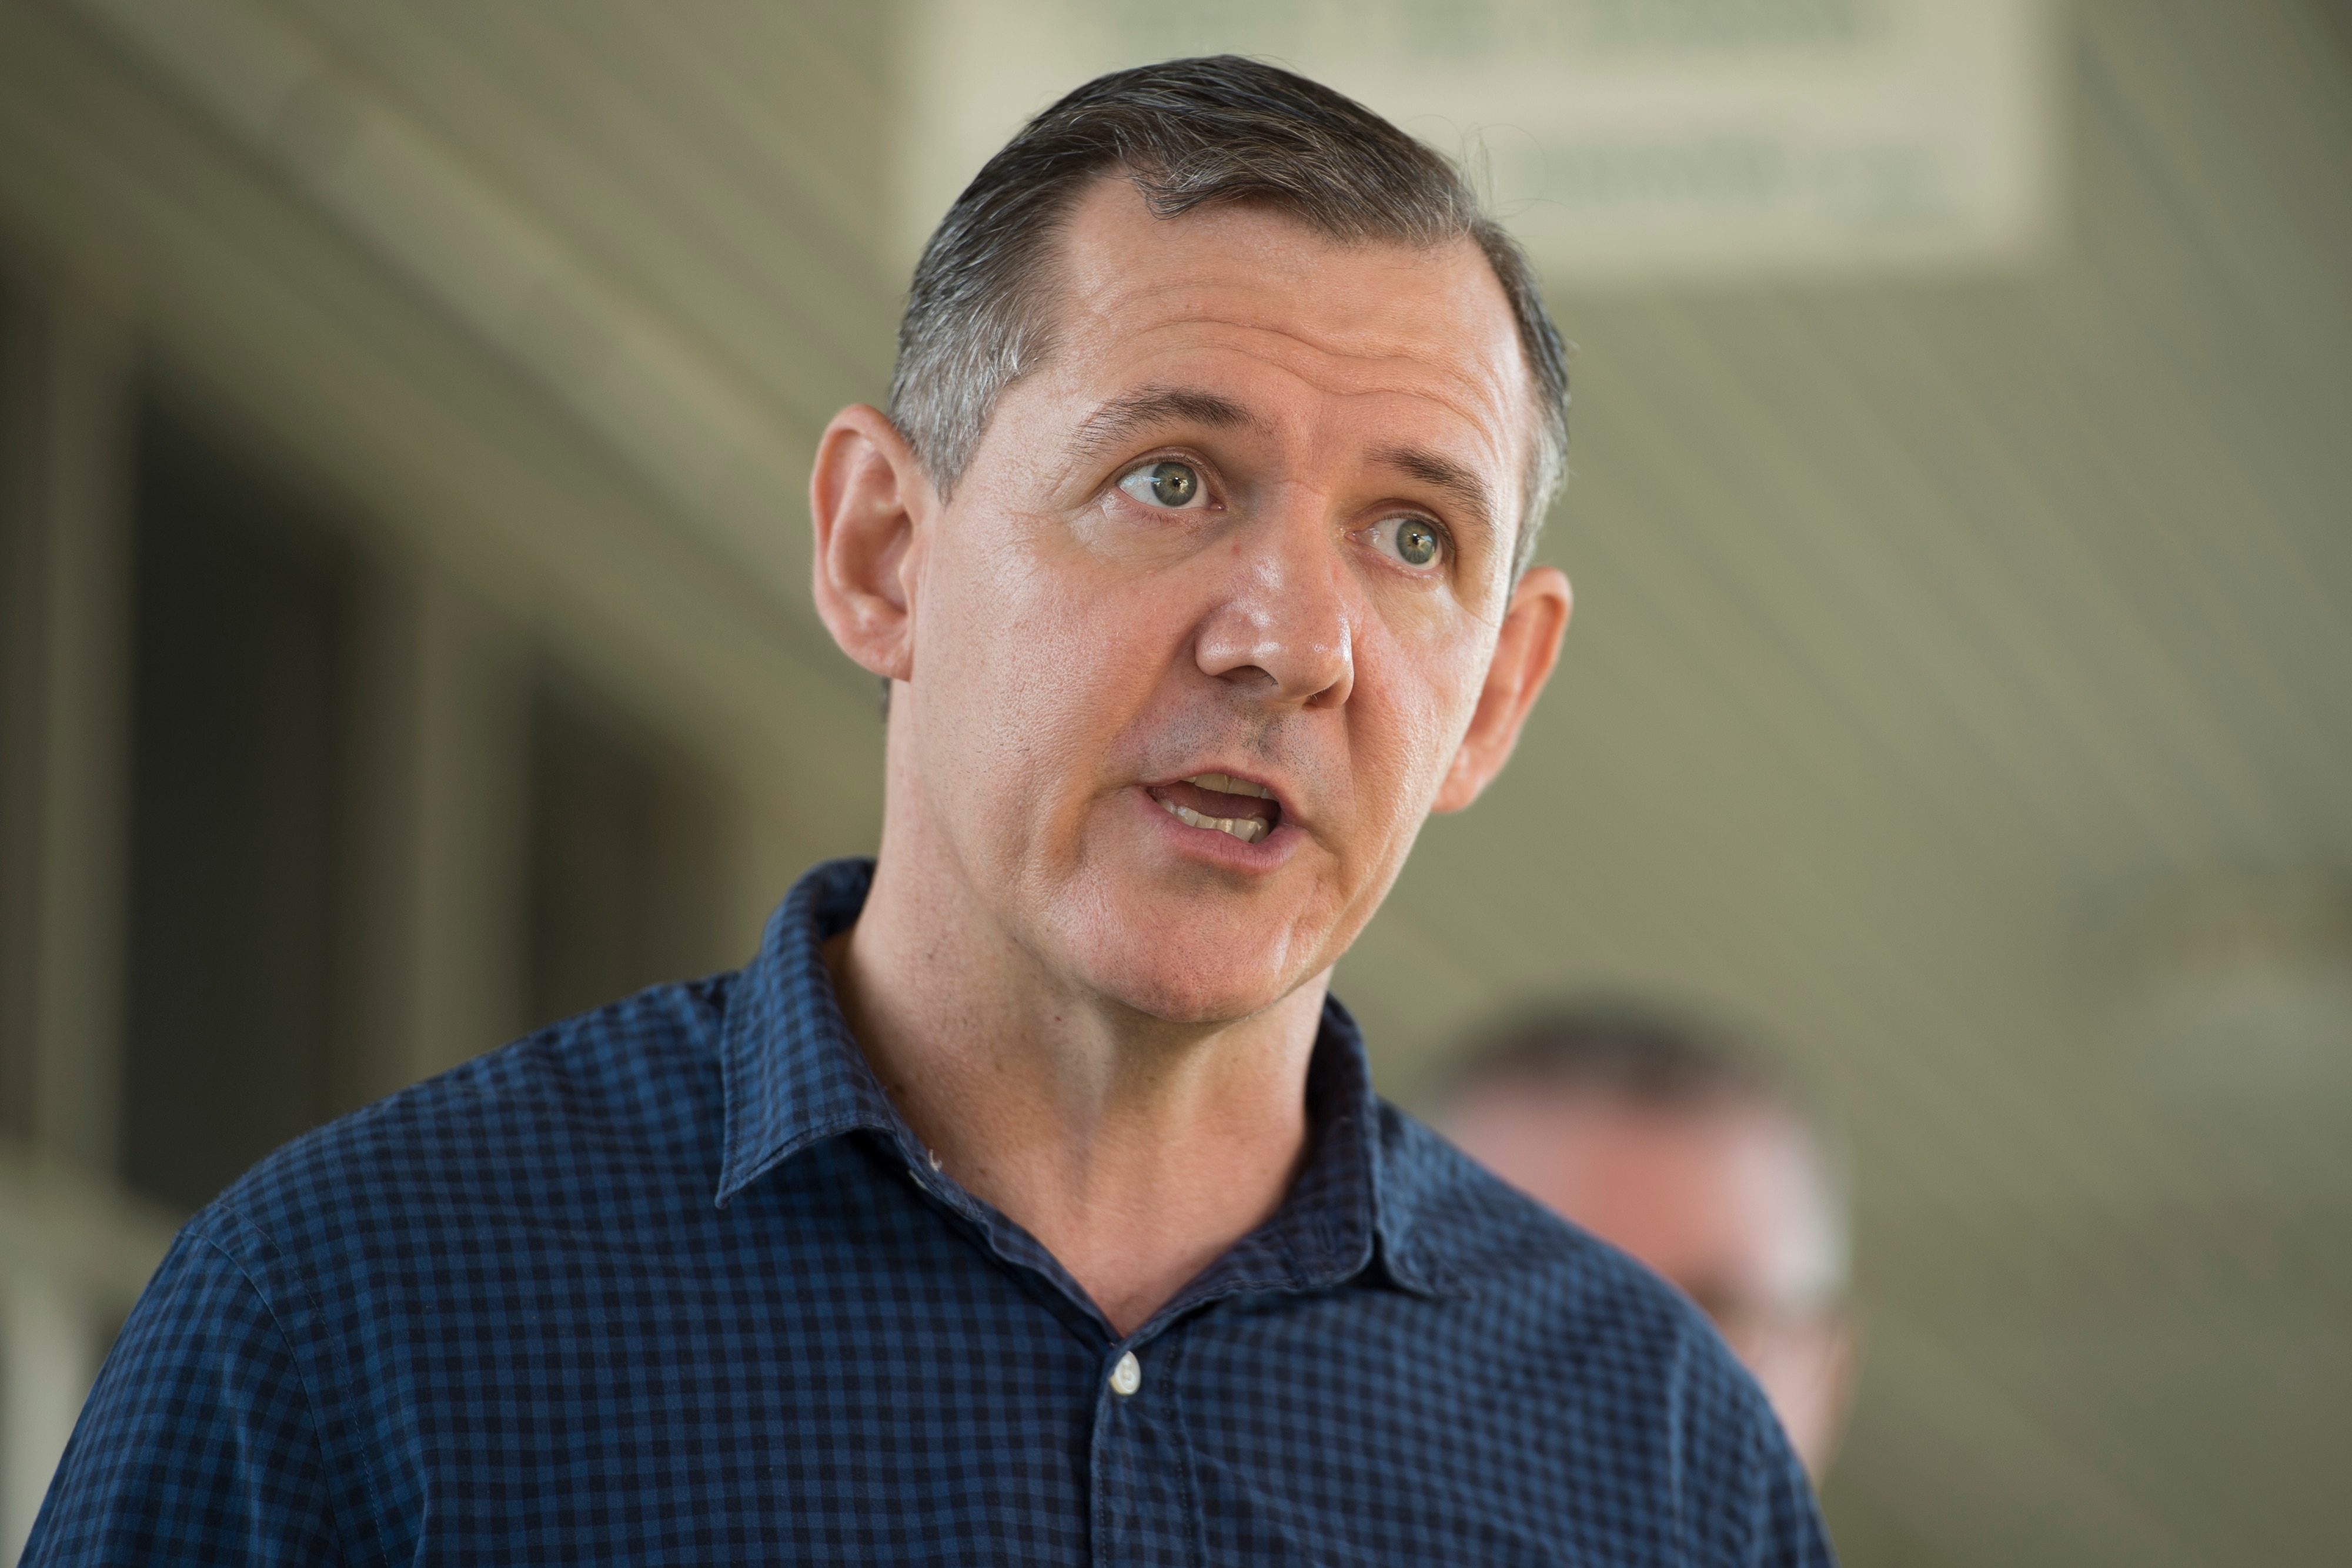 Northern Territory Chief Minister Michael Gunner speaks to reporters at a press conference in Darwin in March 2021.